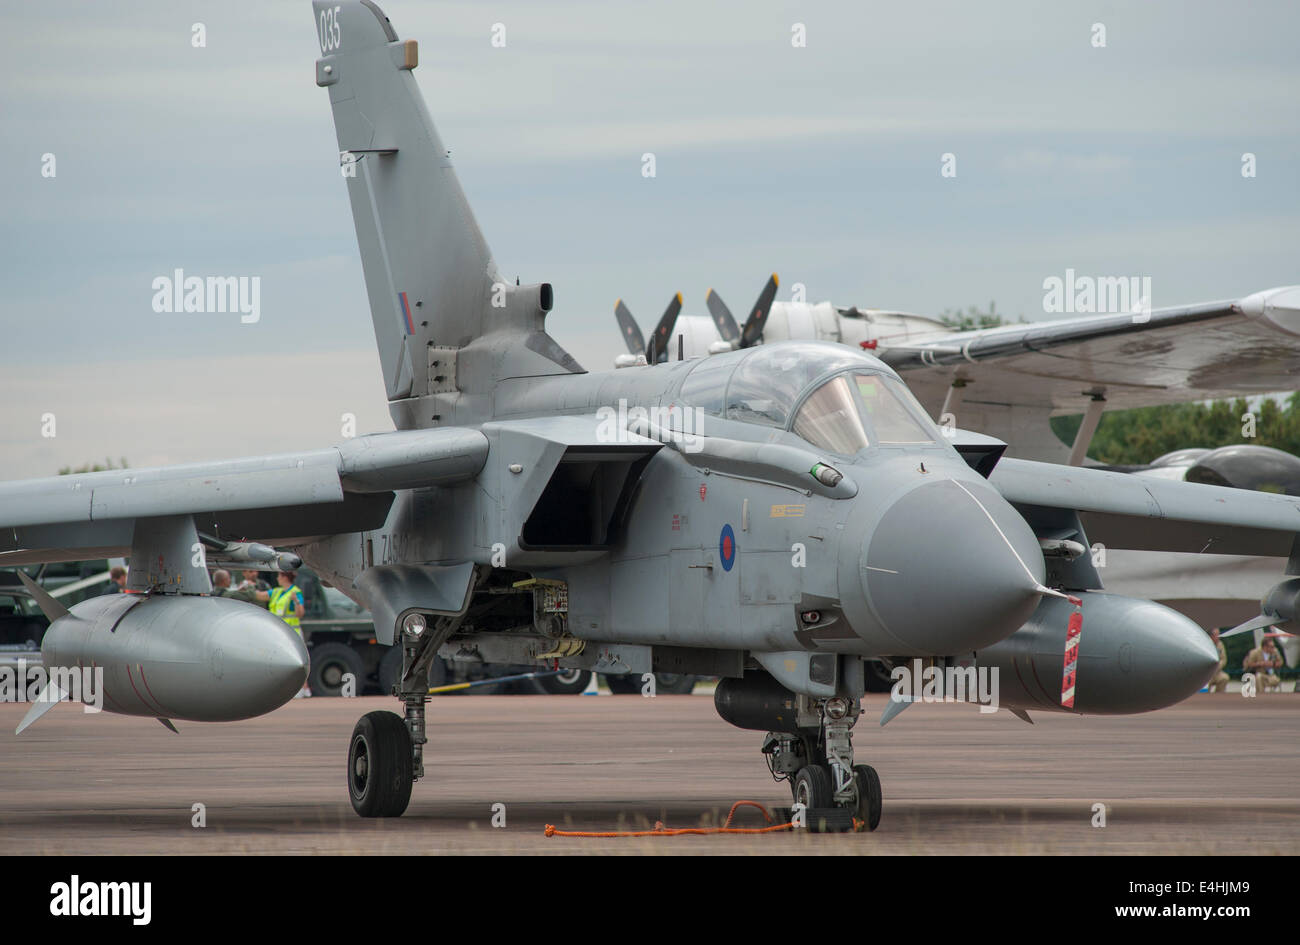 RAF Fairford, Gloucestershire UK. 11th July 2014. Fast jets on display at the first day of RIAT. Royal Air Force Panavia Tornado GR4 035 in the static display. Credit:  Malcolm Park editorial/Alamy Live News Stock Photo